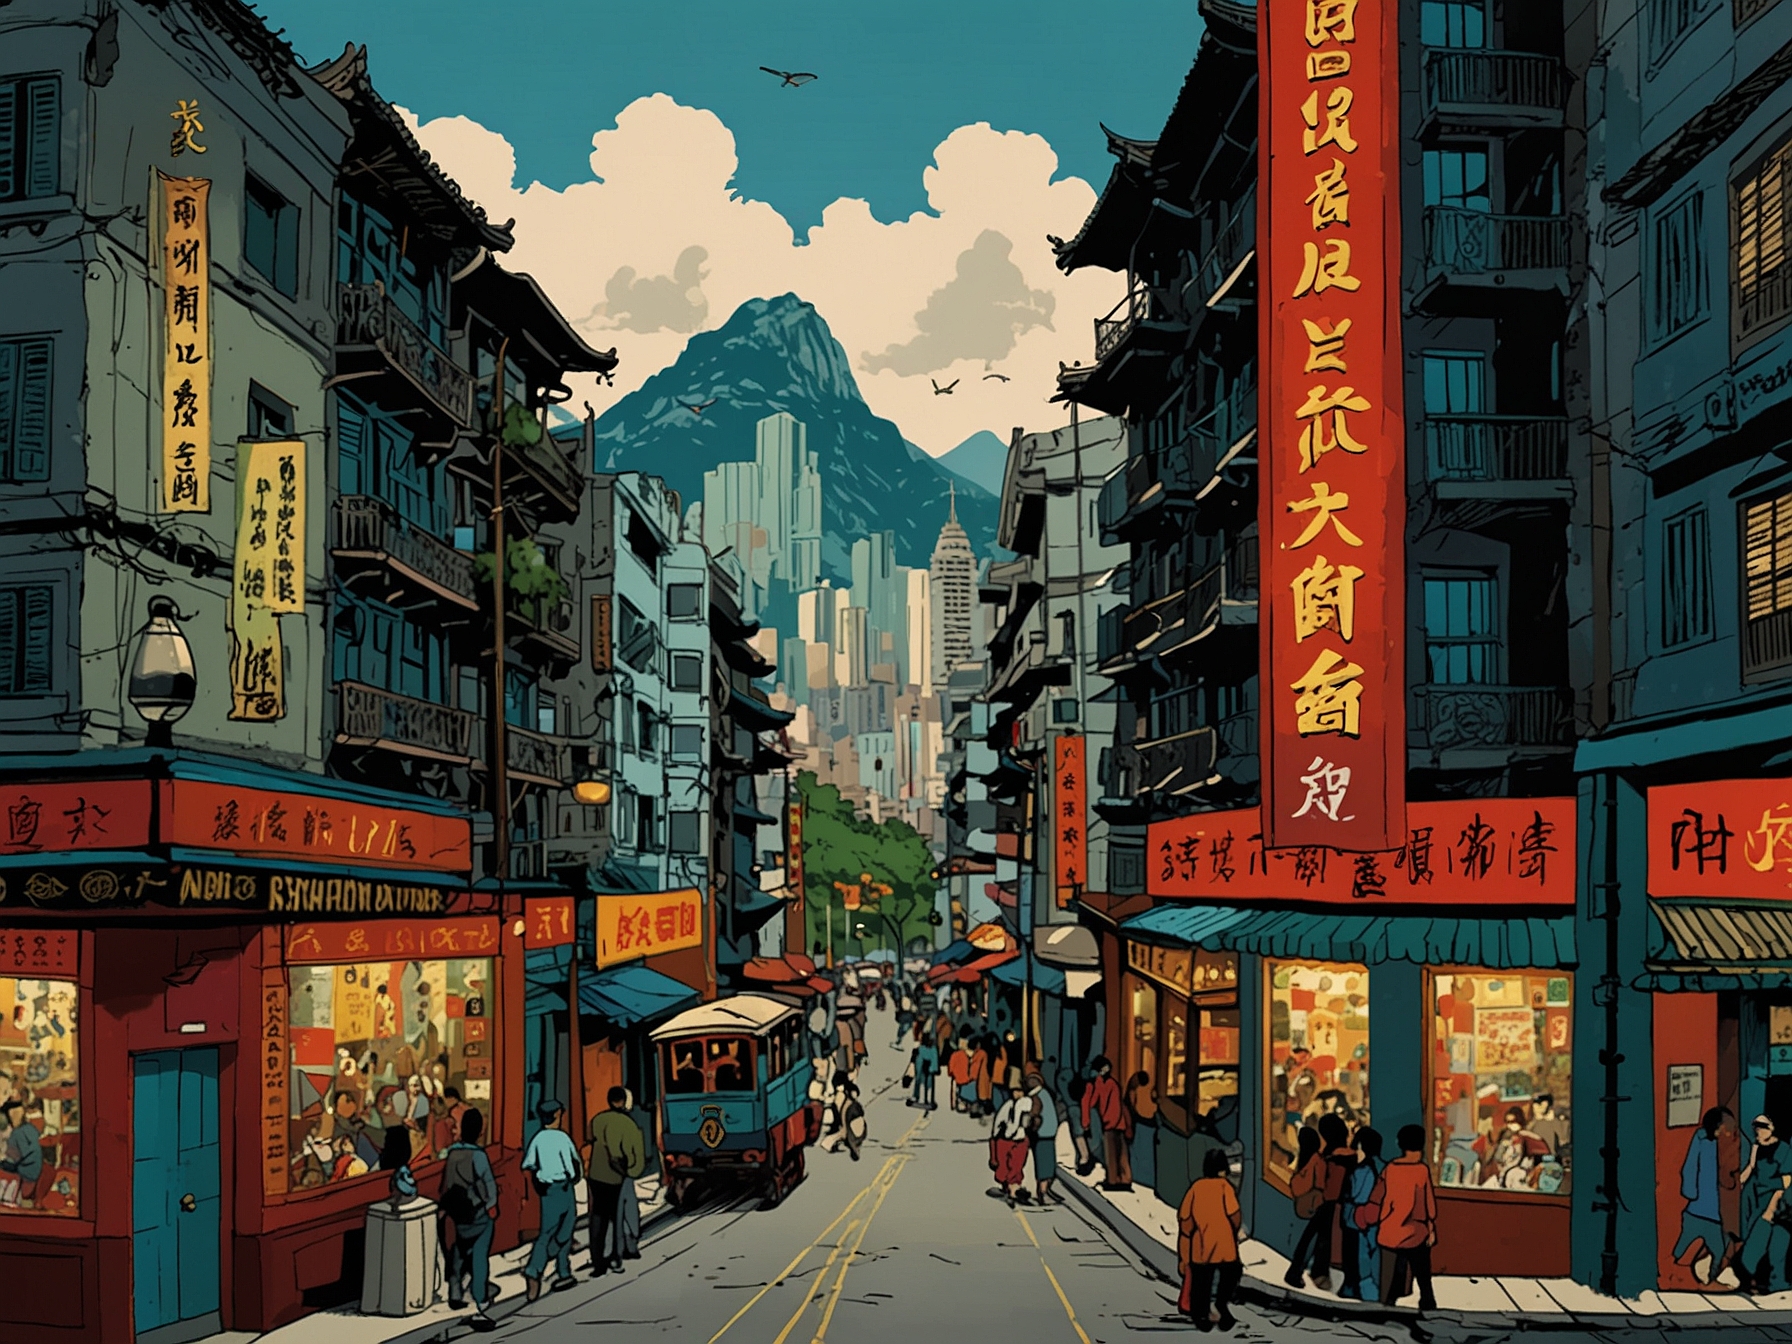 The Modelizer movie poster featuring a vivid collage of Hong Kong scenes, from traditional Chinese customs to British colonial influences, emphasizing the city's cultural diversity and dynamic landscape.